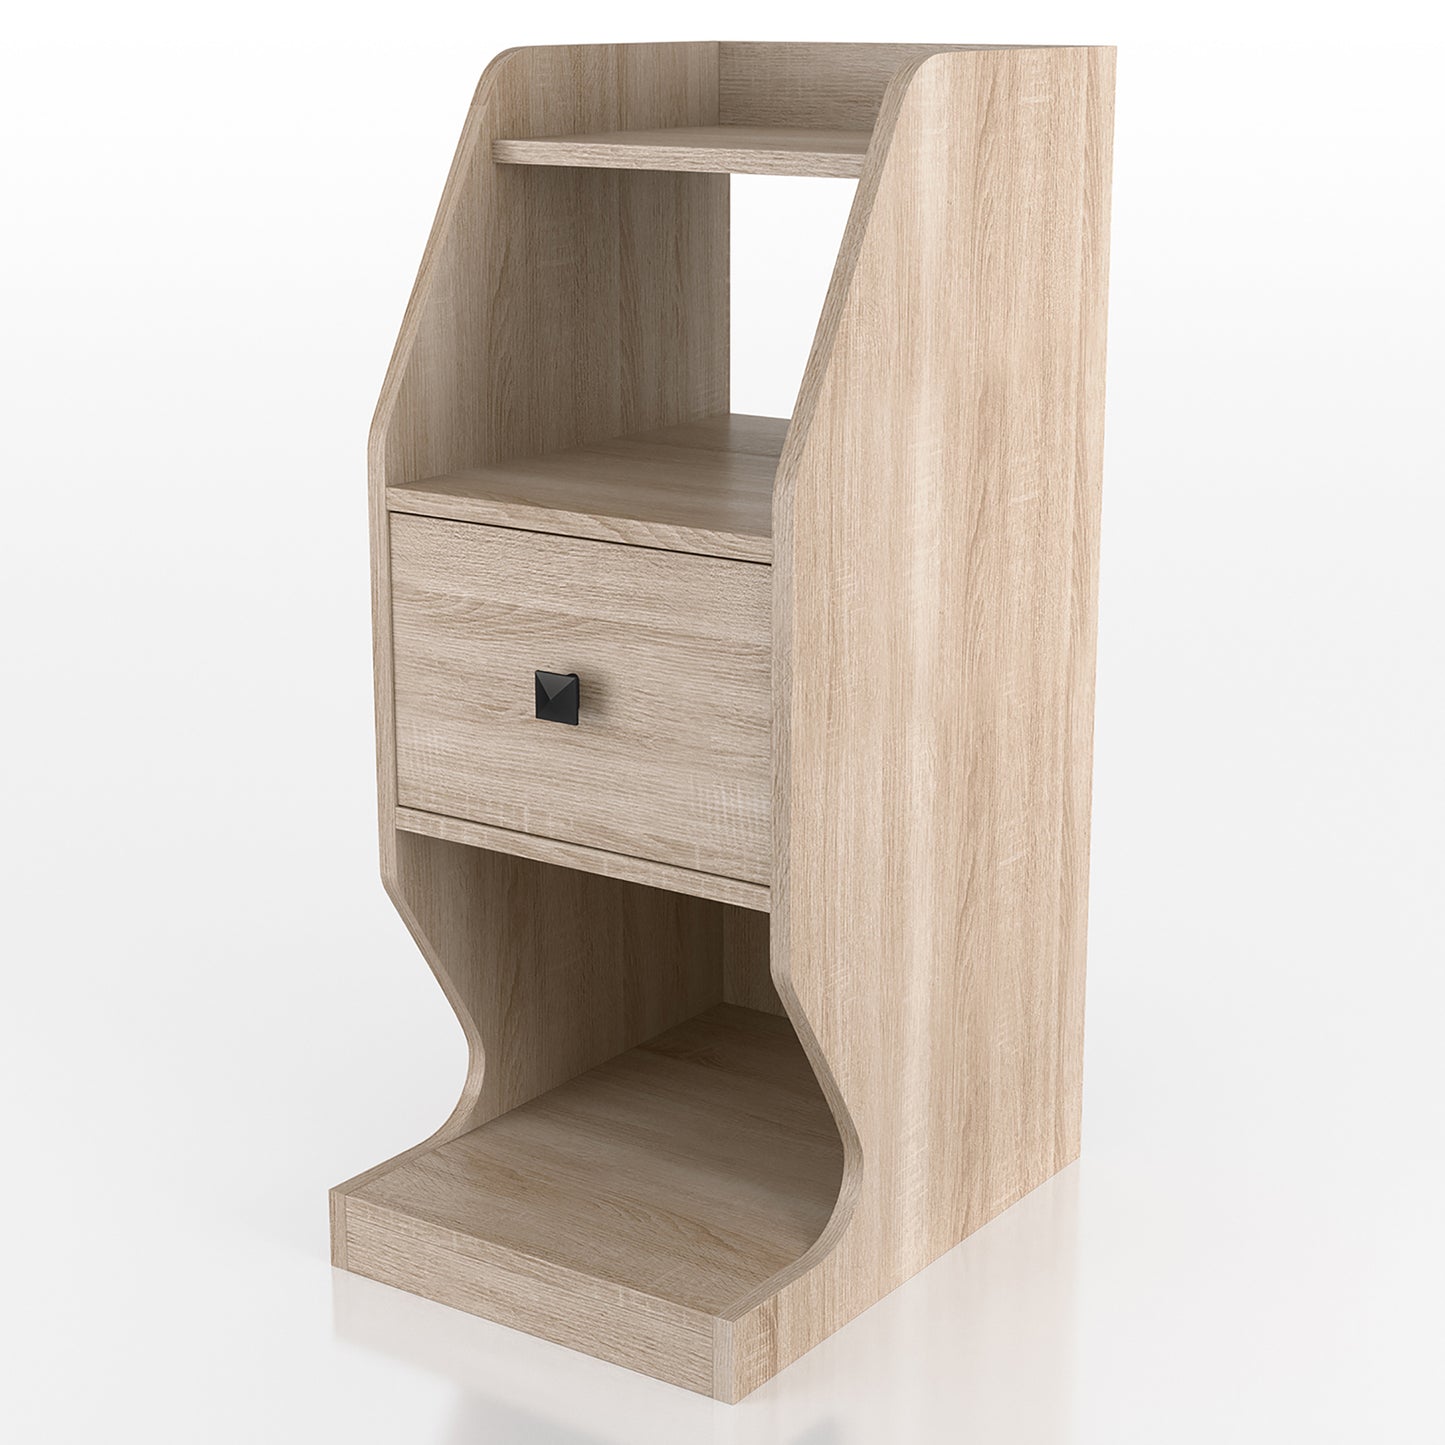 Left angled transitional natural oak tiered one-drawer nightstand on a white background